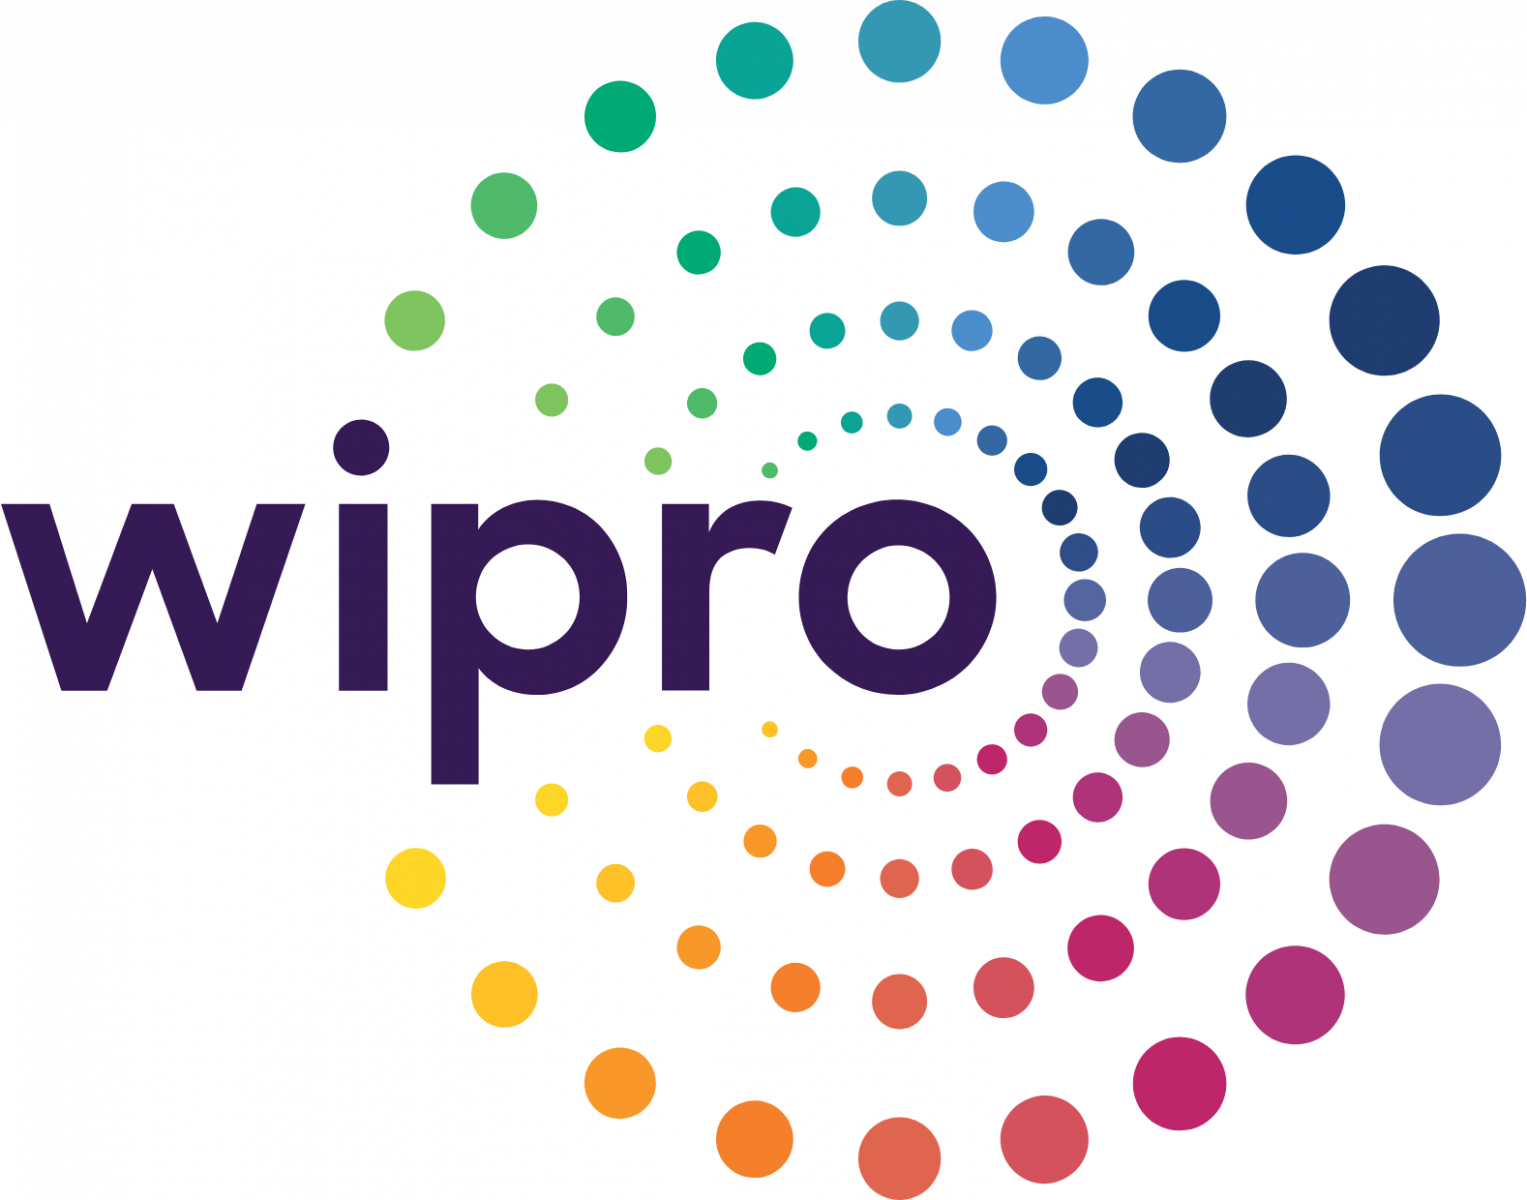 Wipro it companies in Thane